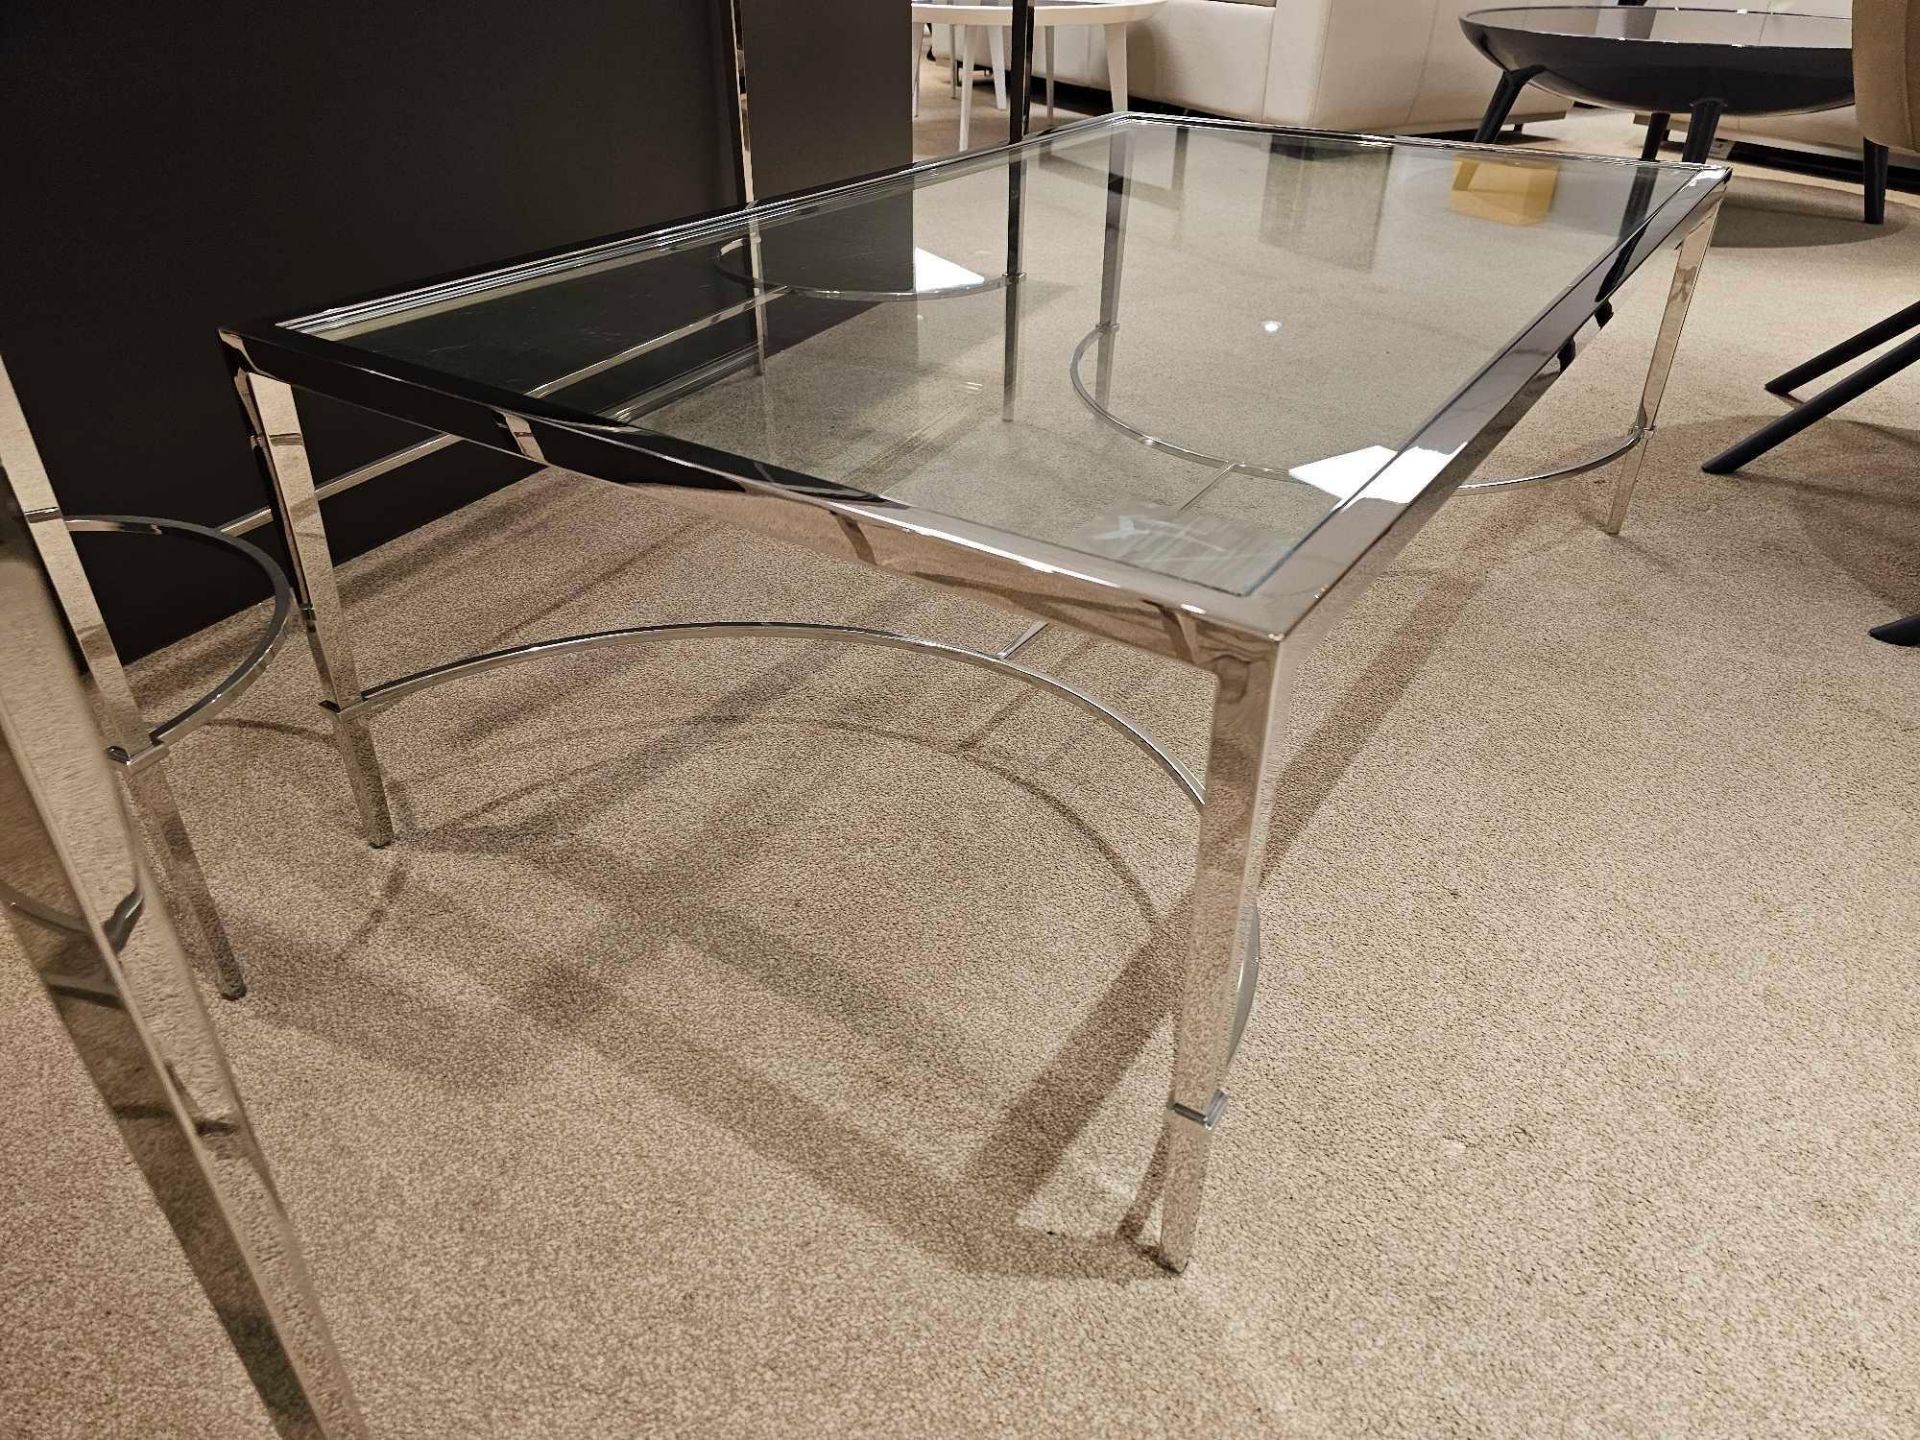 Tokyo Coffee Table by Kesterport The Tokyo coffee table with its clear glass top and a refined - Image 3 of 4